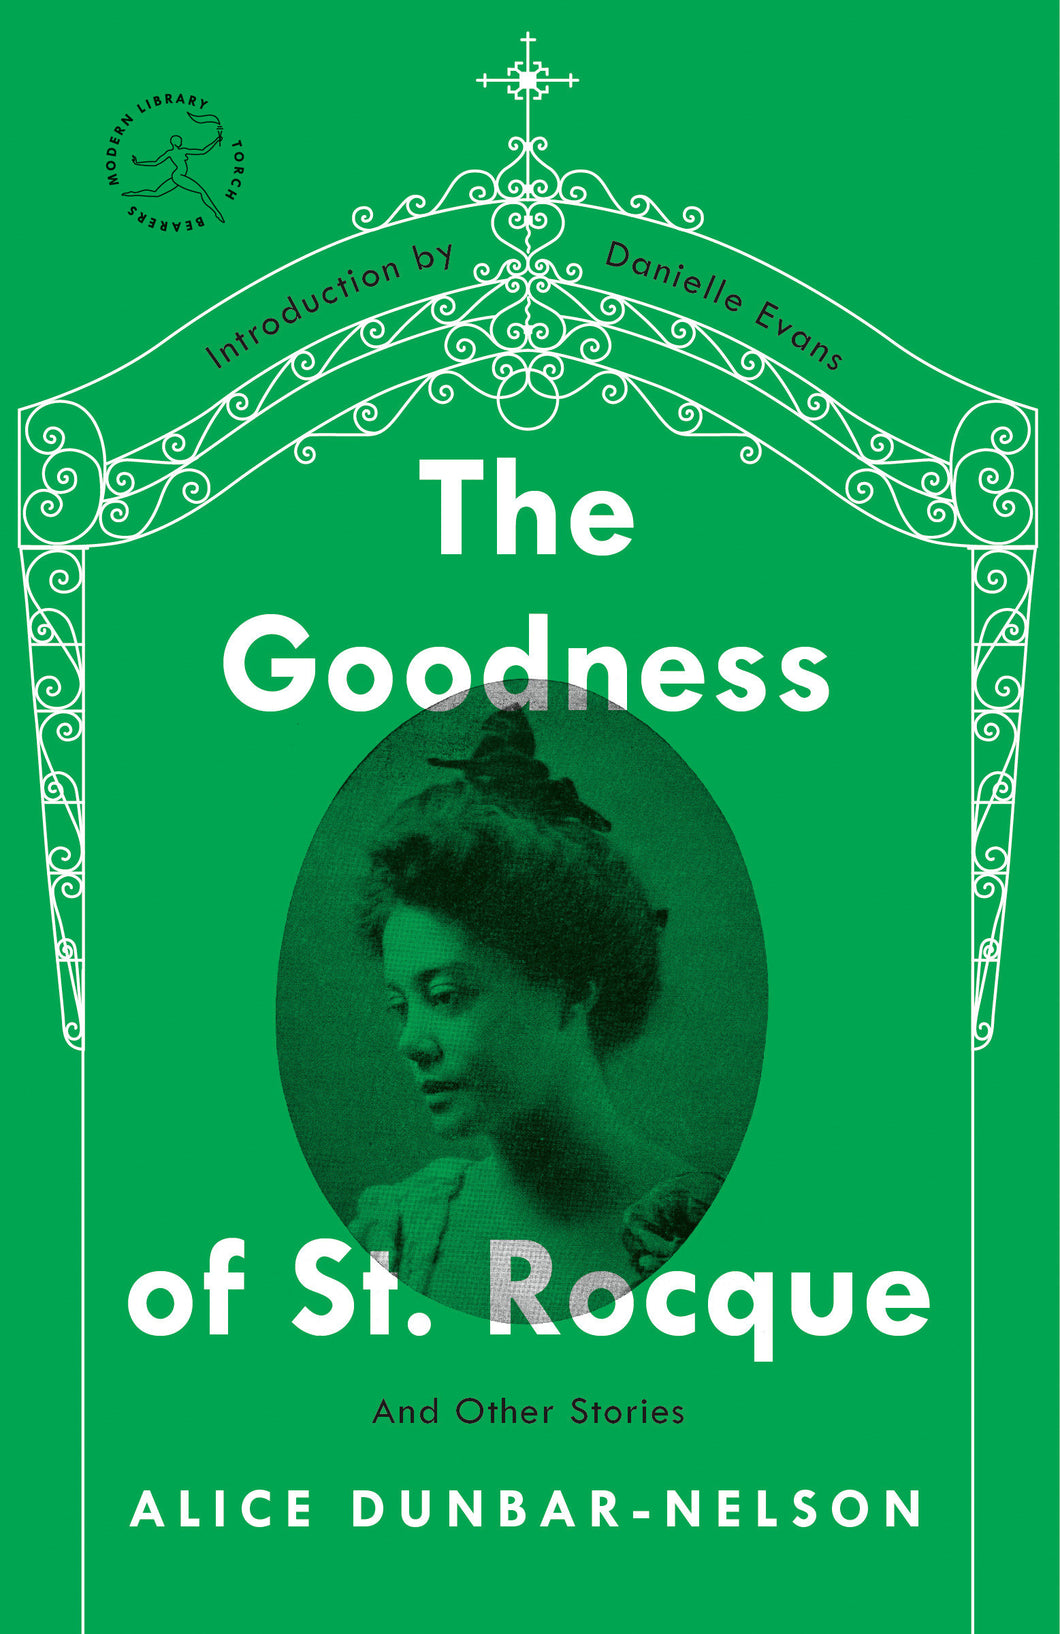 The Goodness of St. Rocque: And Other Stories